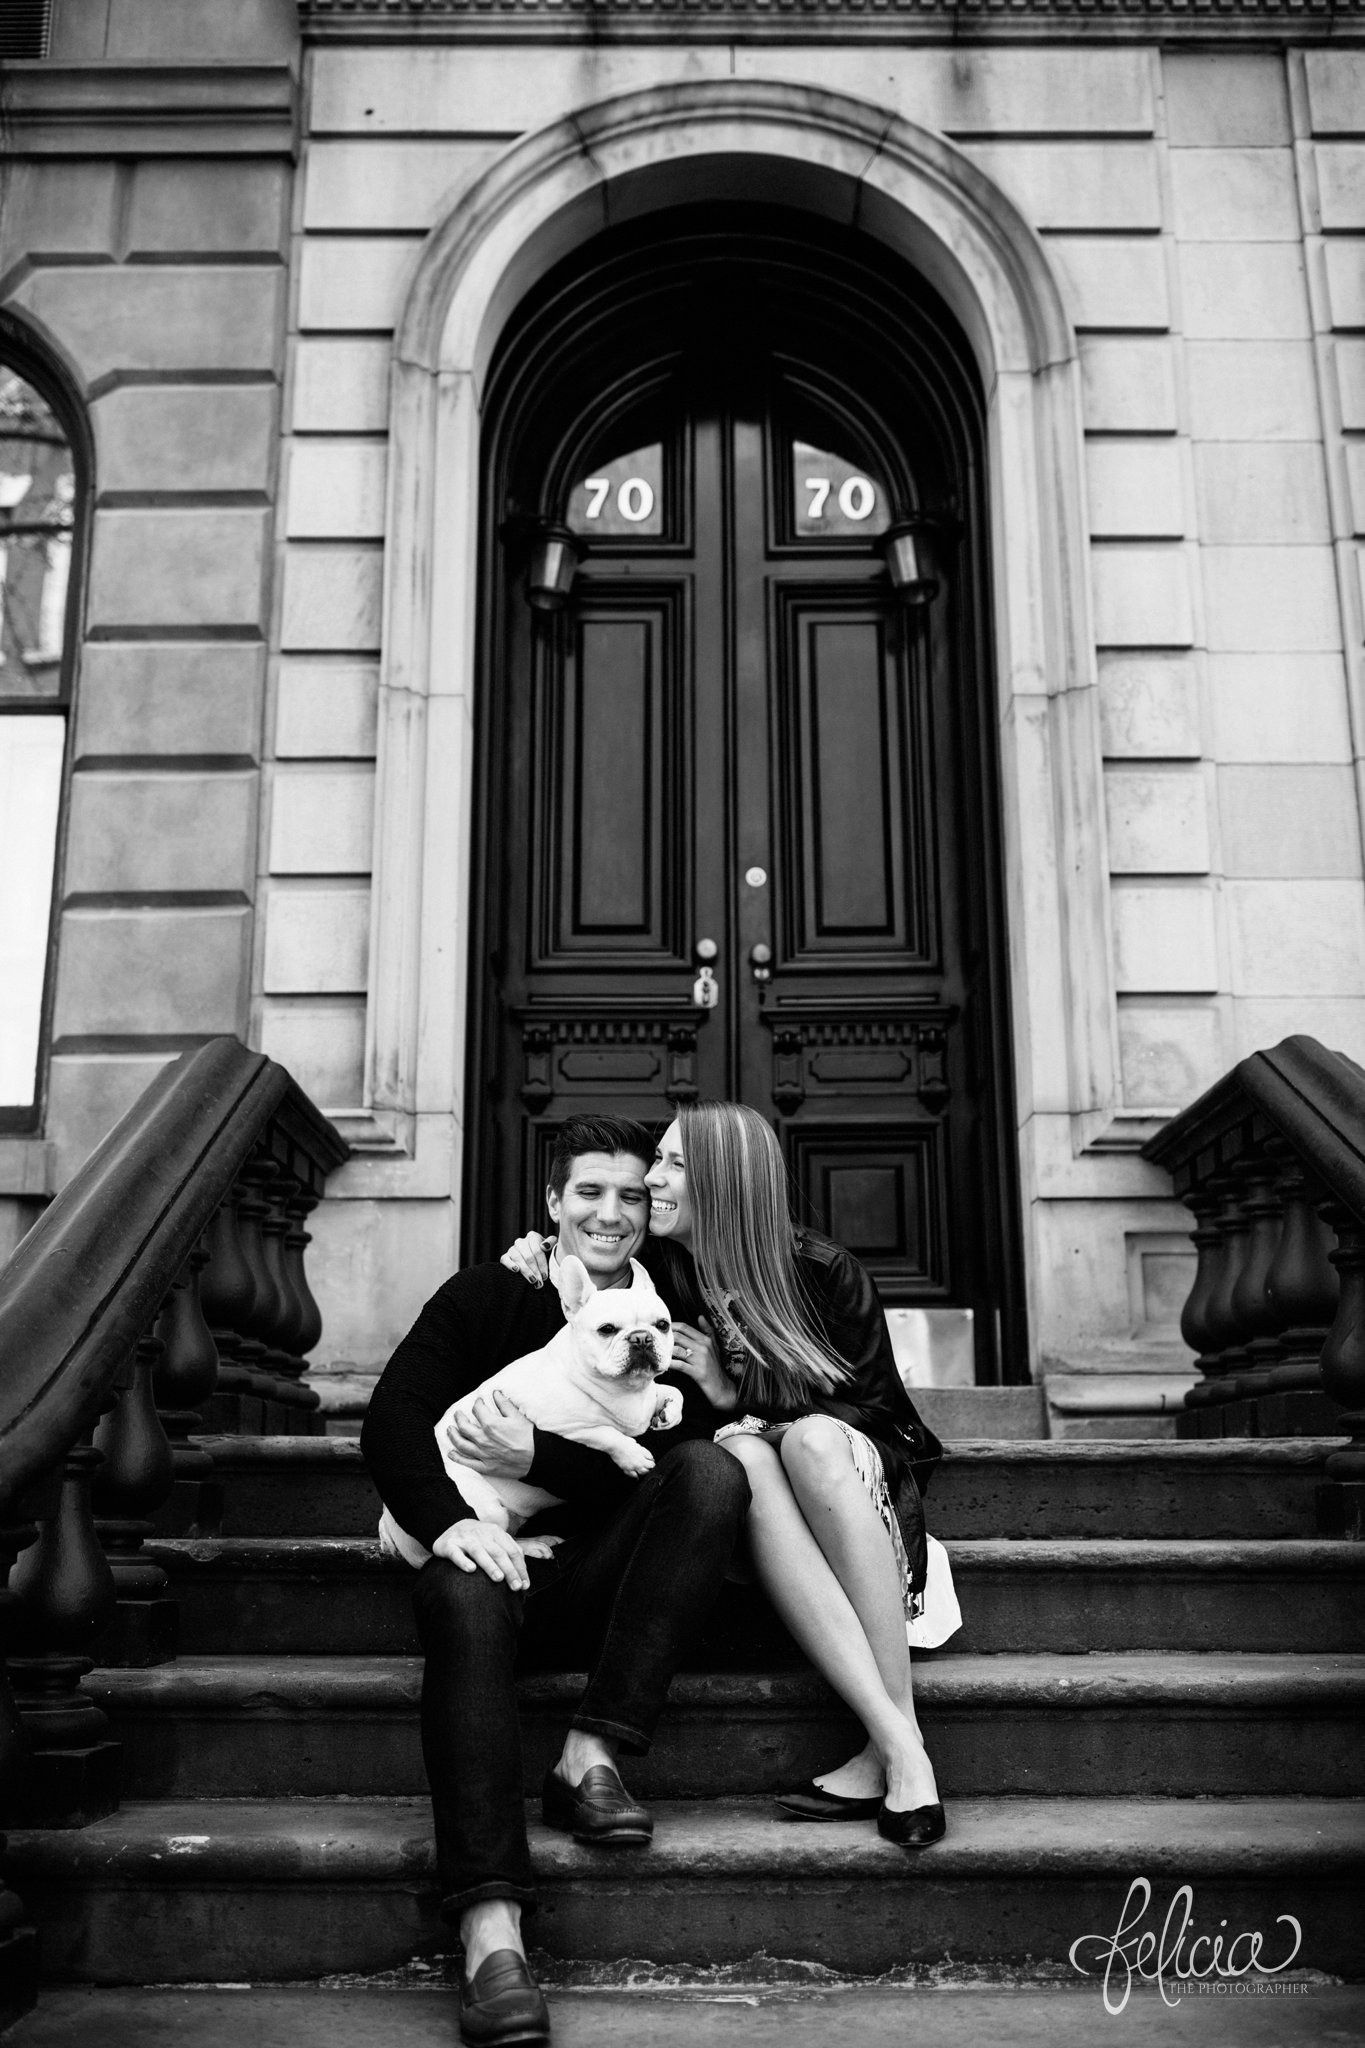 wedding | New York City | West Village | New York City photography | wedding photography | images by feliciathephotographer.com | engagement photos | engagement pictures in New York City | stairwell | French Bulldog | engagement photos with dog | romantic engagement photos | ring photography | candid | black and white | doorway | arched door frame 